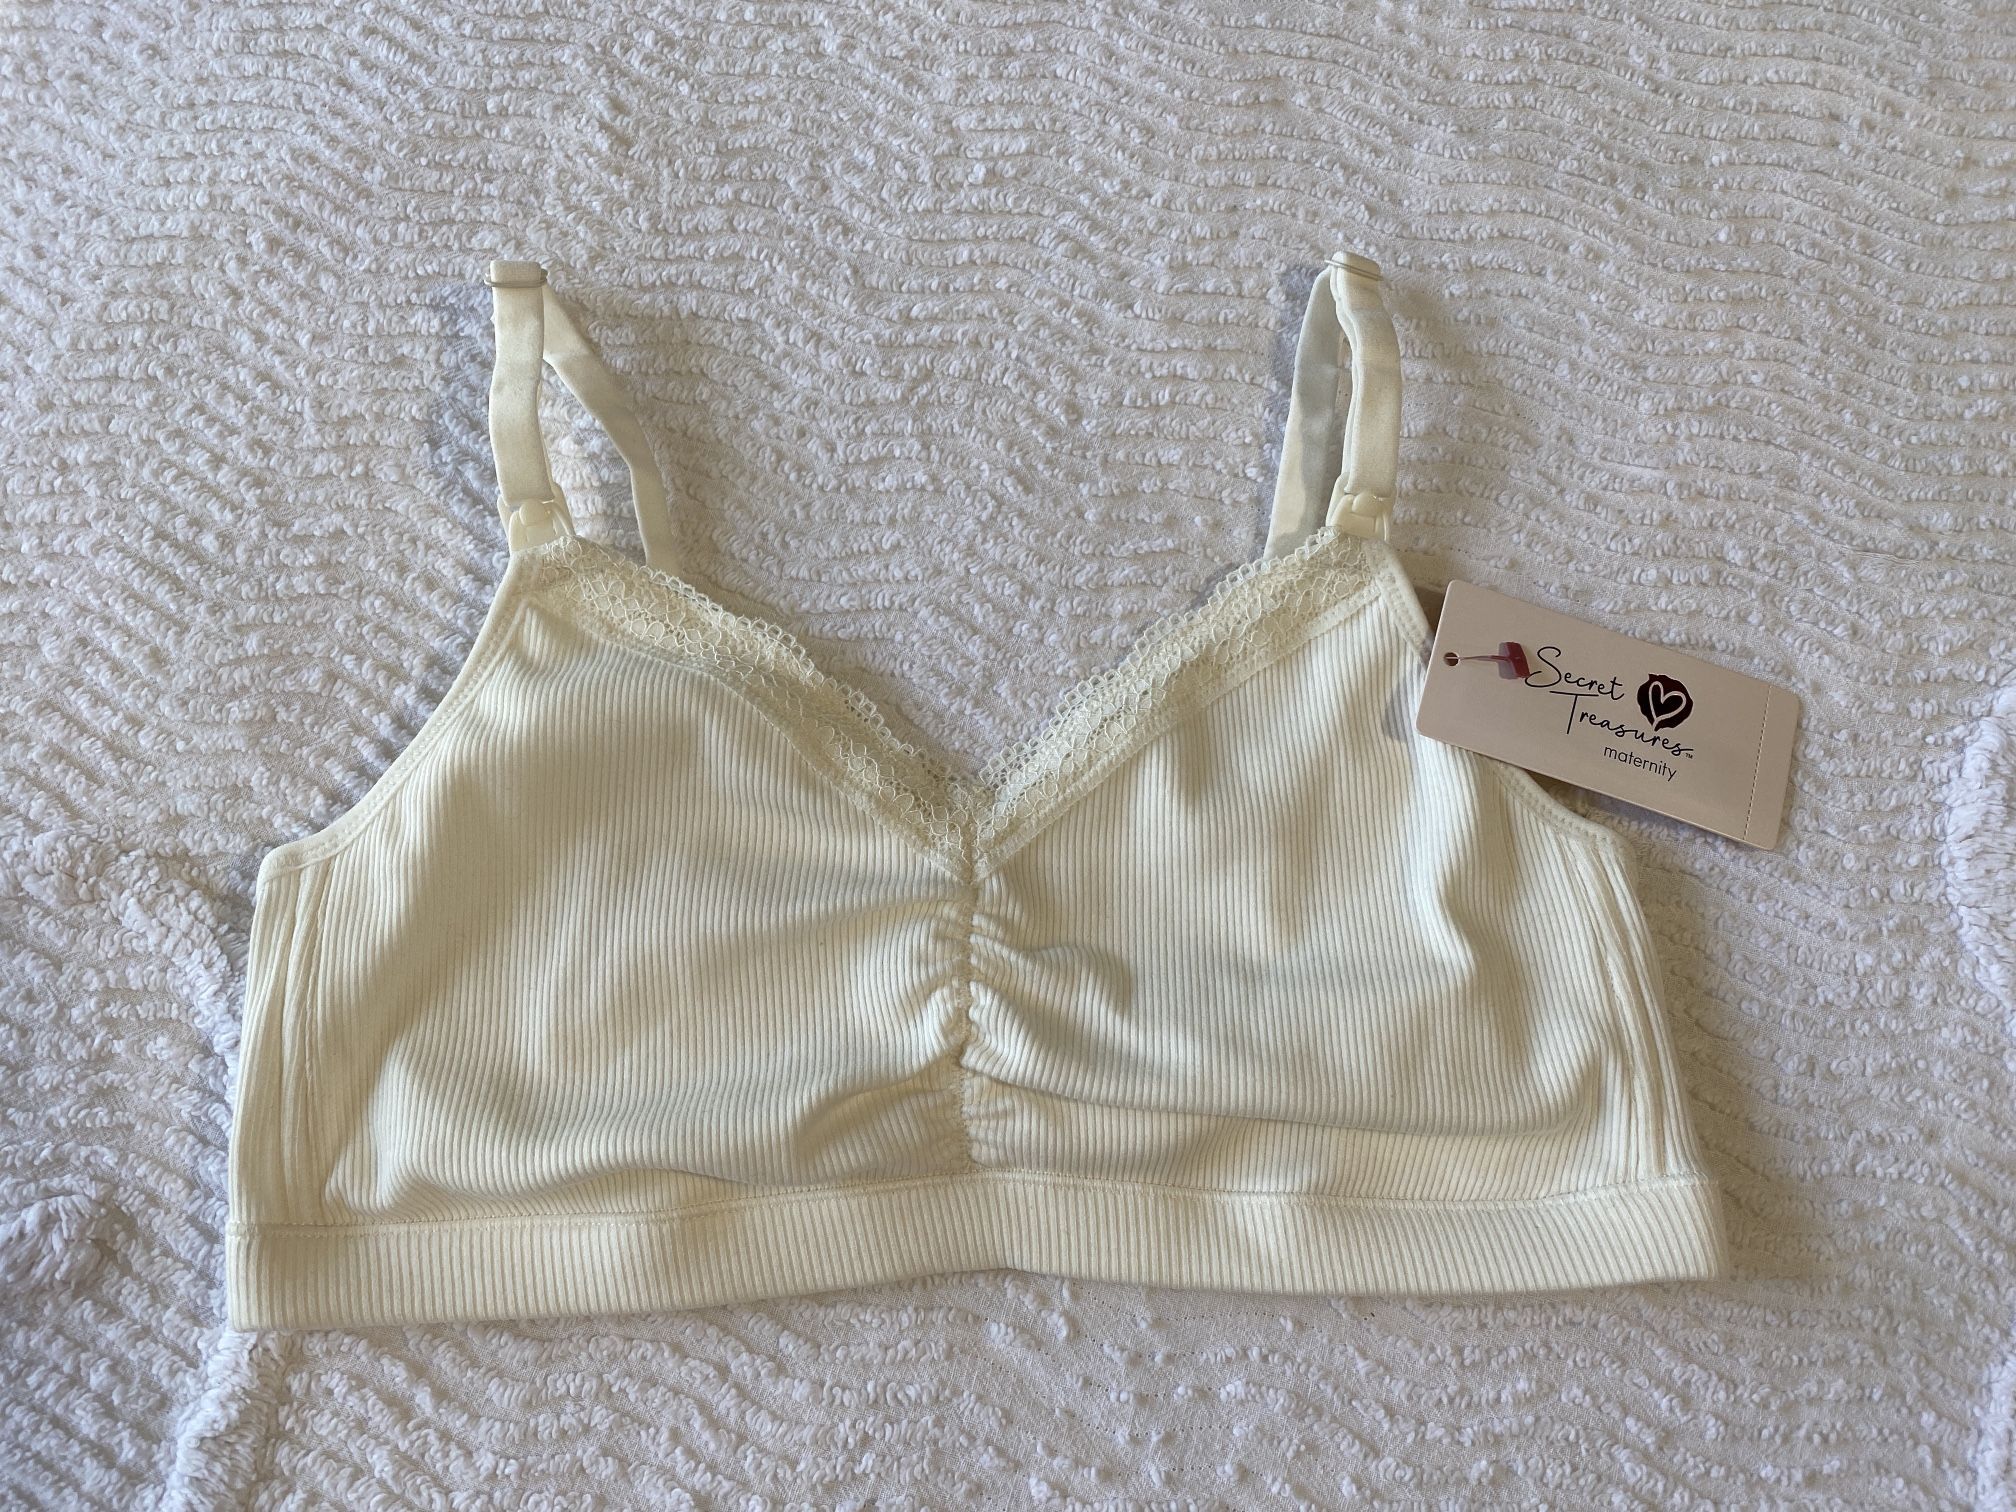 Secret Treasures Ivory Colored Nursing Bra - Size L (see sizing guide) -  NWT for Sale in Ponca City, OK - OfferUp